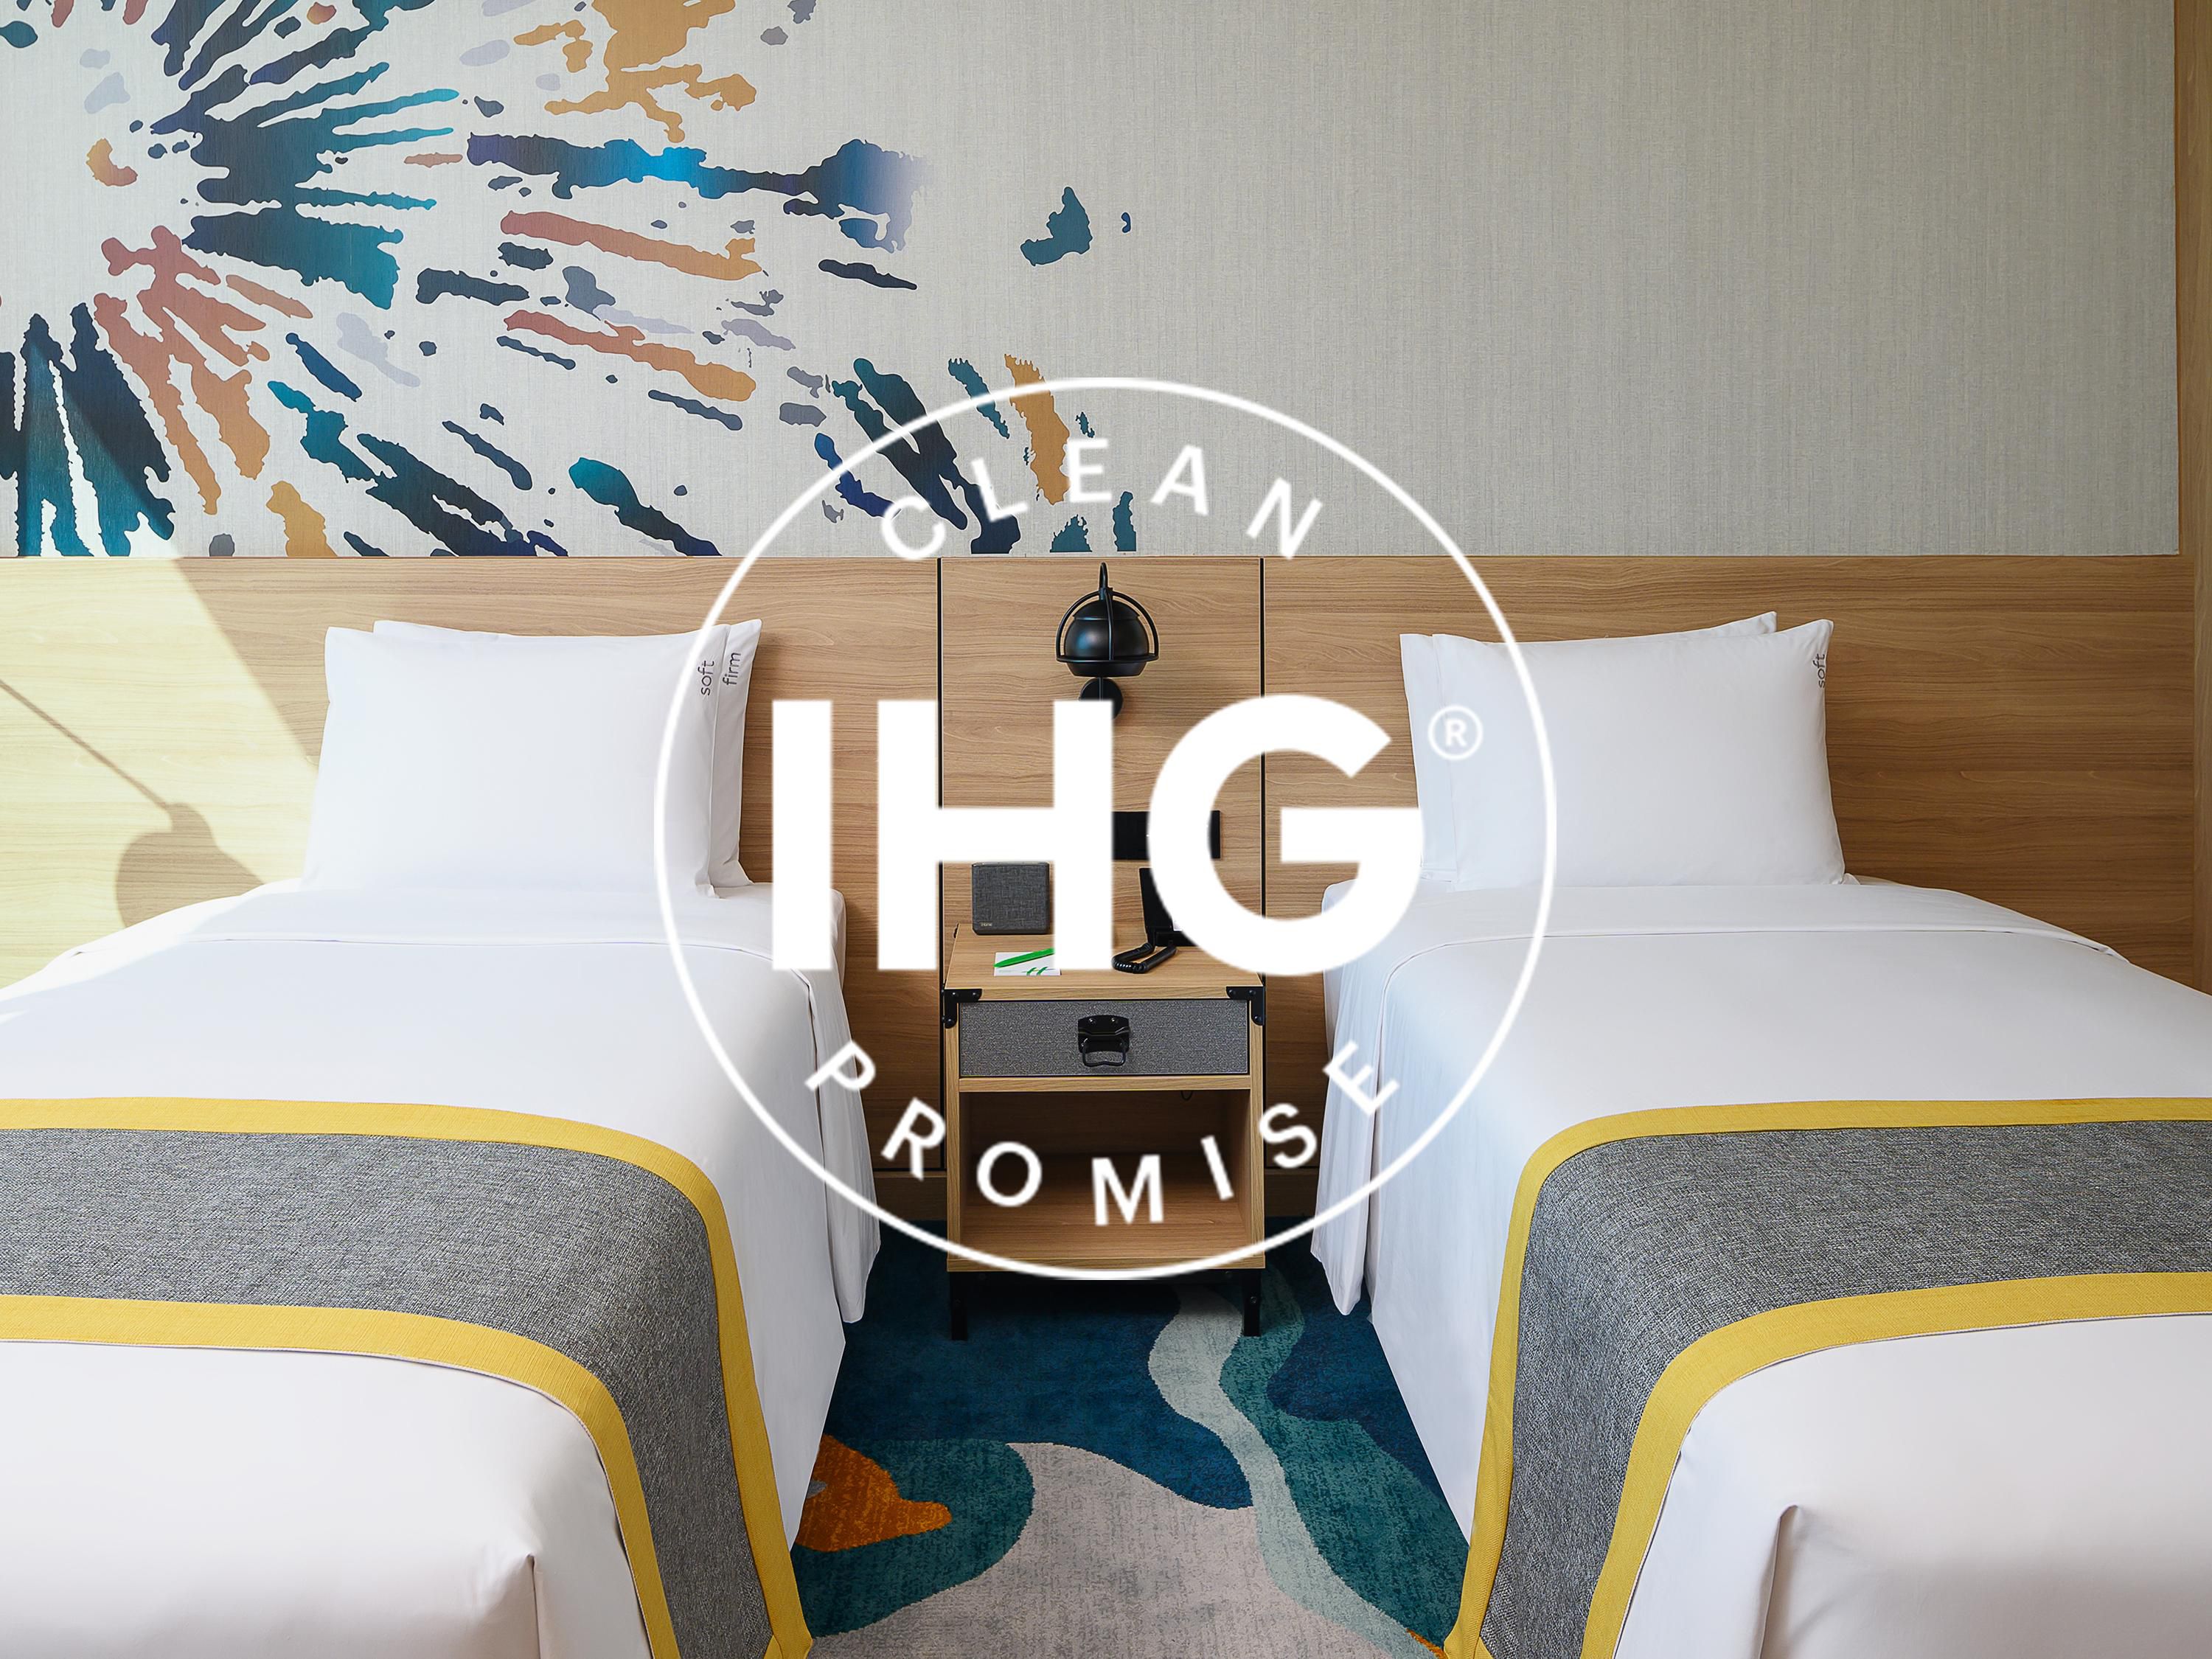 Good isn’t good enough – we’re committed to high levels of cleanliness. That means clean, well maintained, clutter free rooms that meet our standards. If this isn’t what you find when you check-in then we promise to make it right.